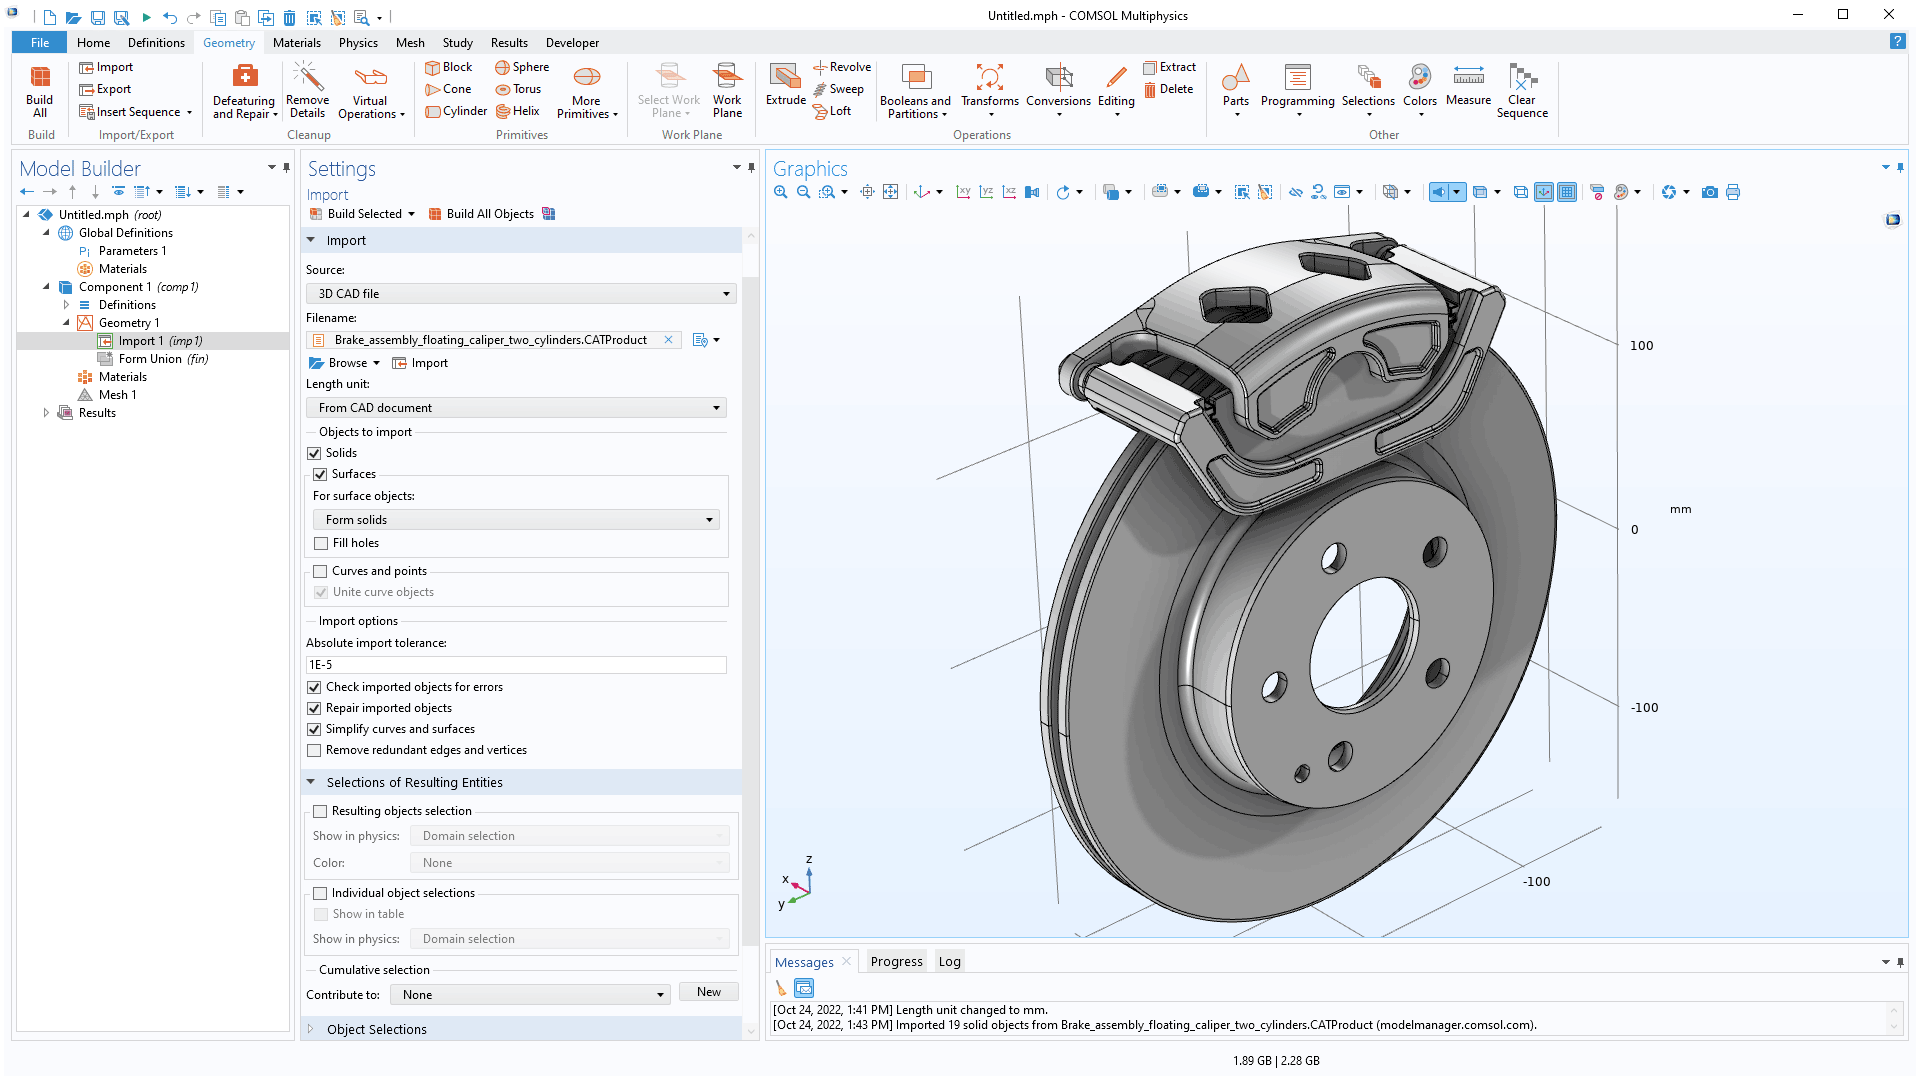 The COMSOL Multiphysics UI showing the Model Builder with the Import node highlighted, the corresponding Settings window, and a caliper model in the Graphics window.